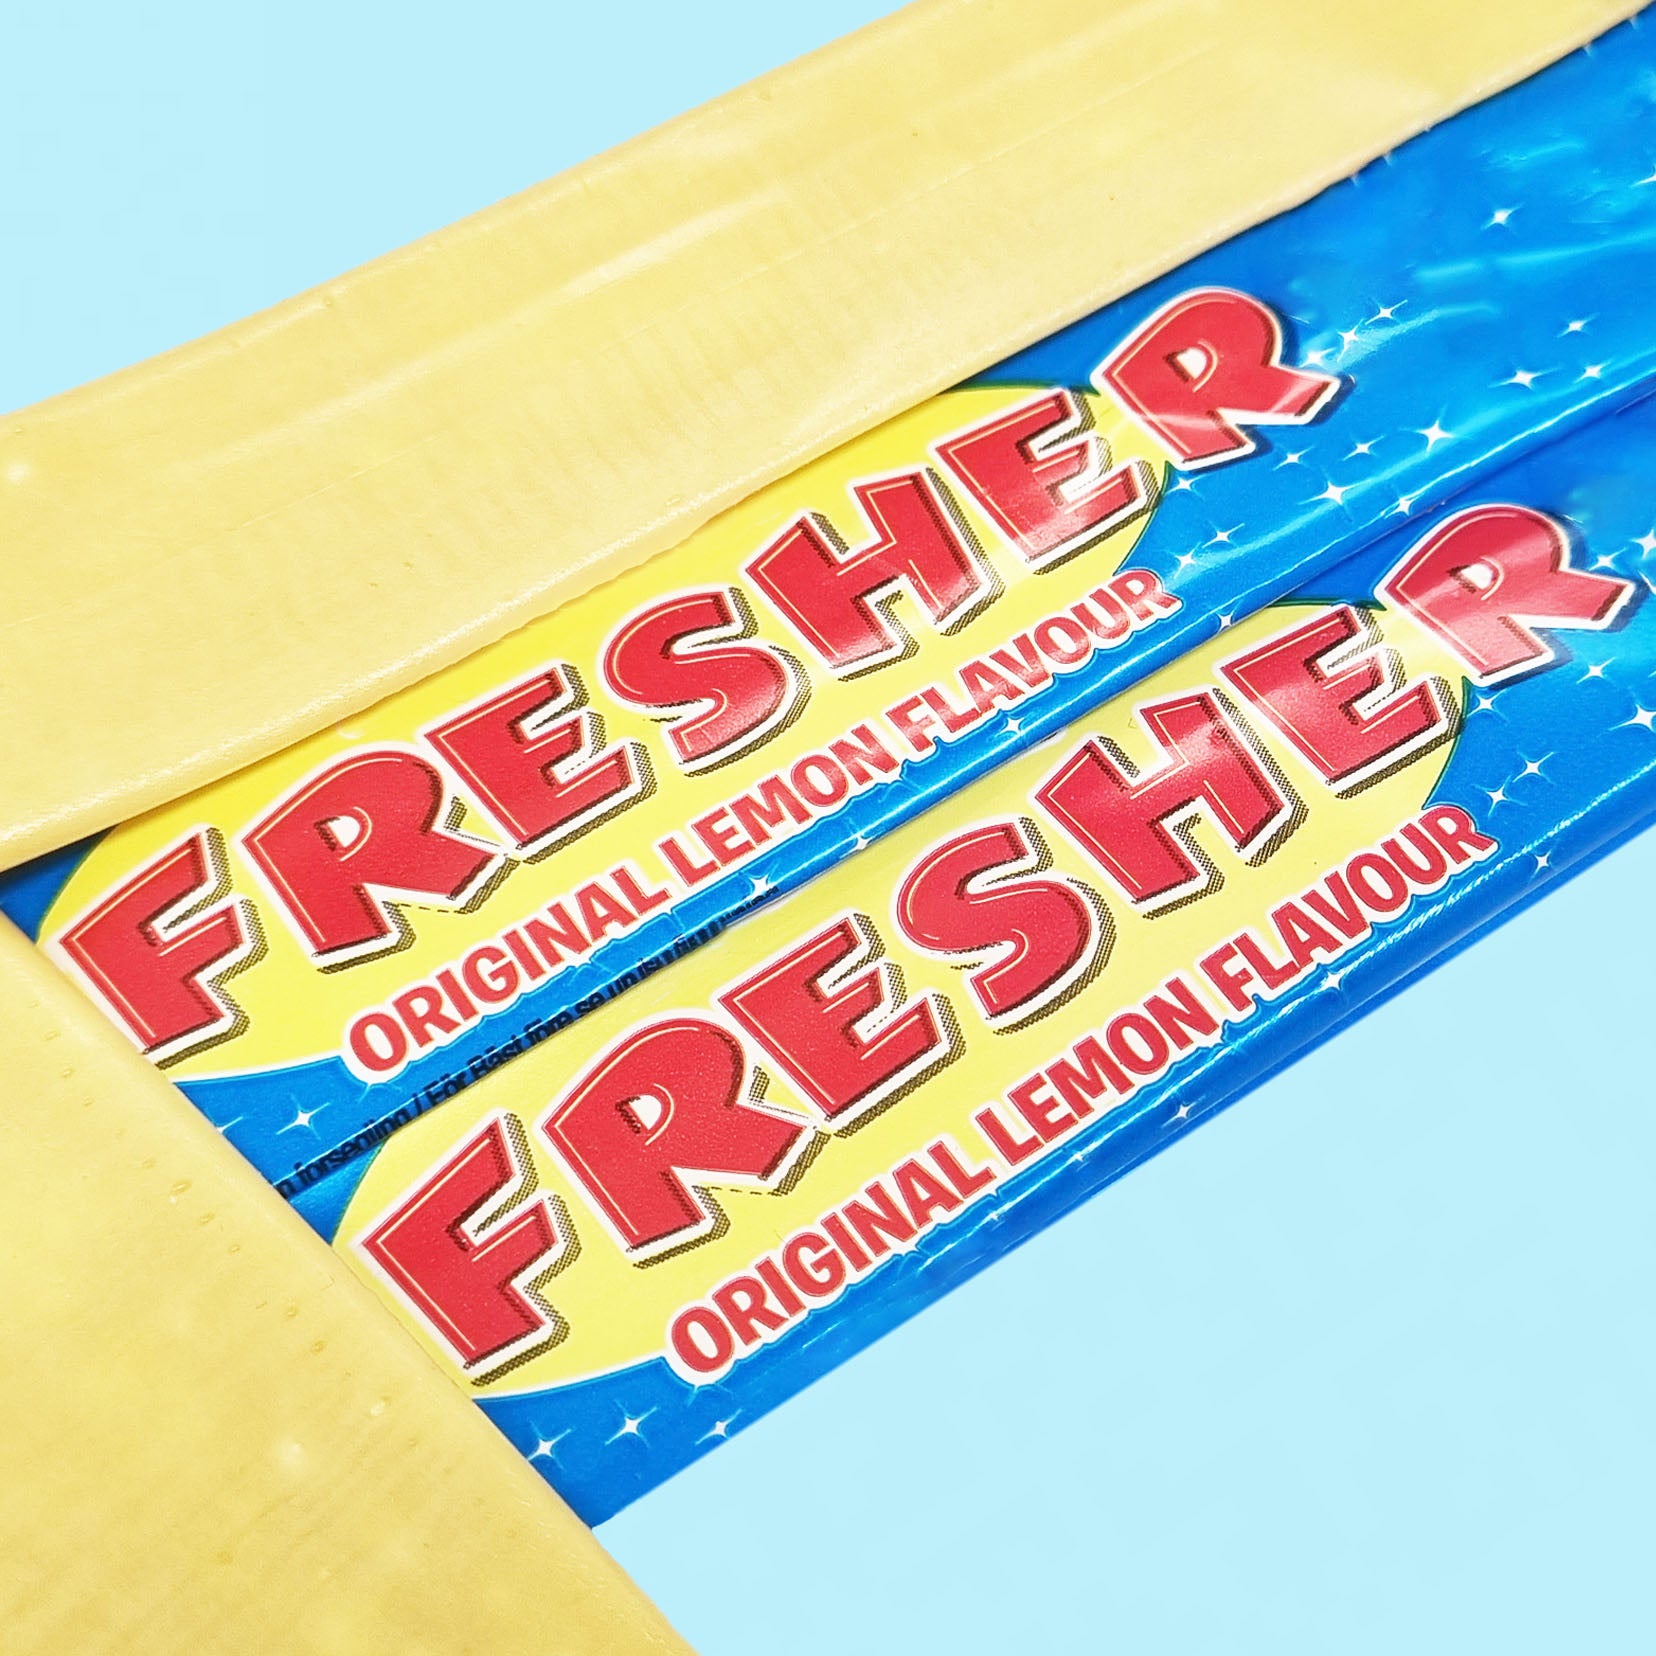 Fresher Sweeties Fragrance Oil | Truly Personal | Candles, Wax Melts, Soap, Bath Bombs